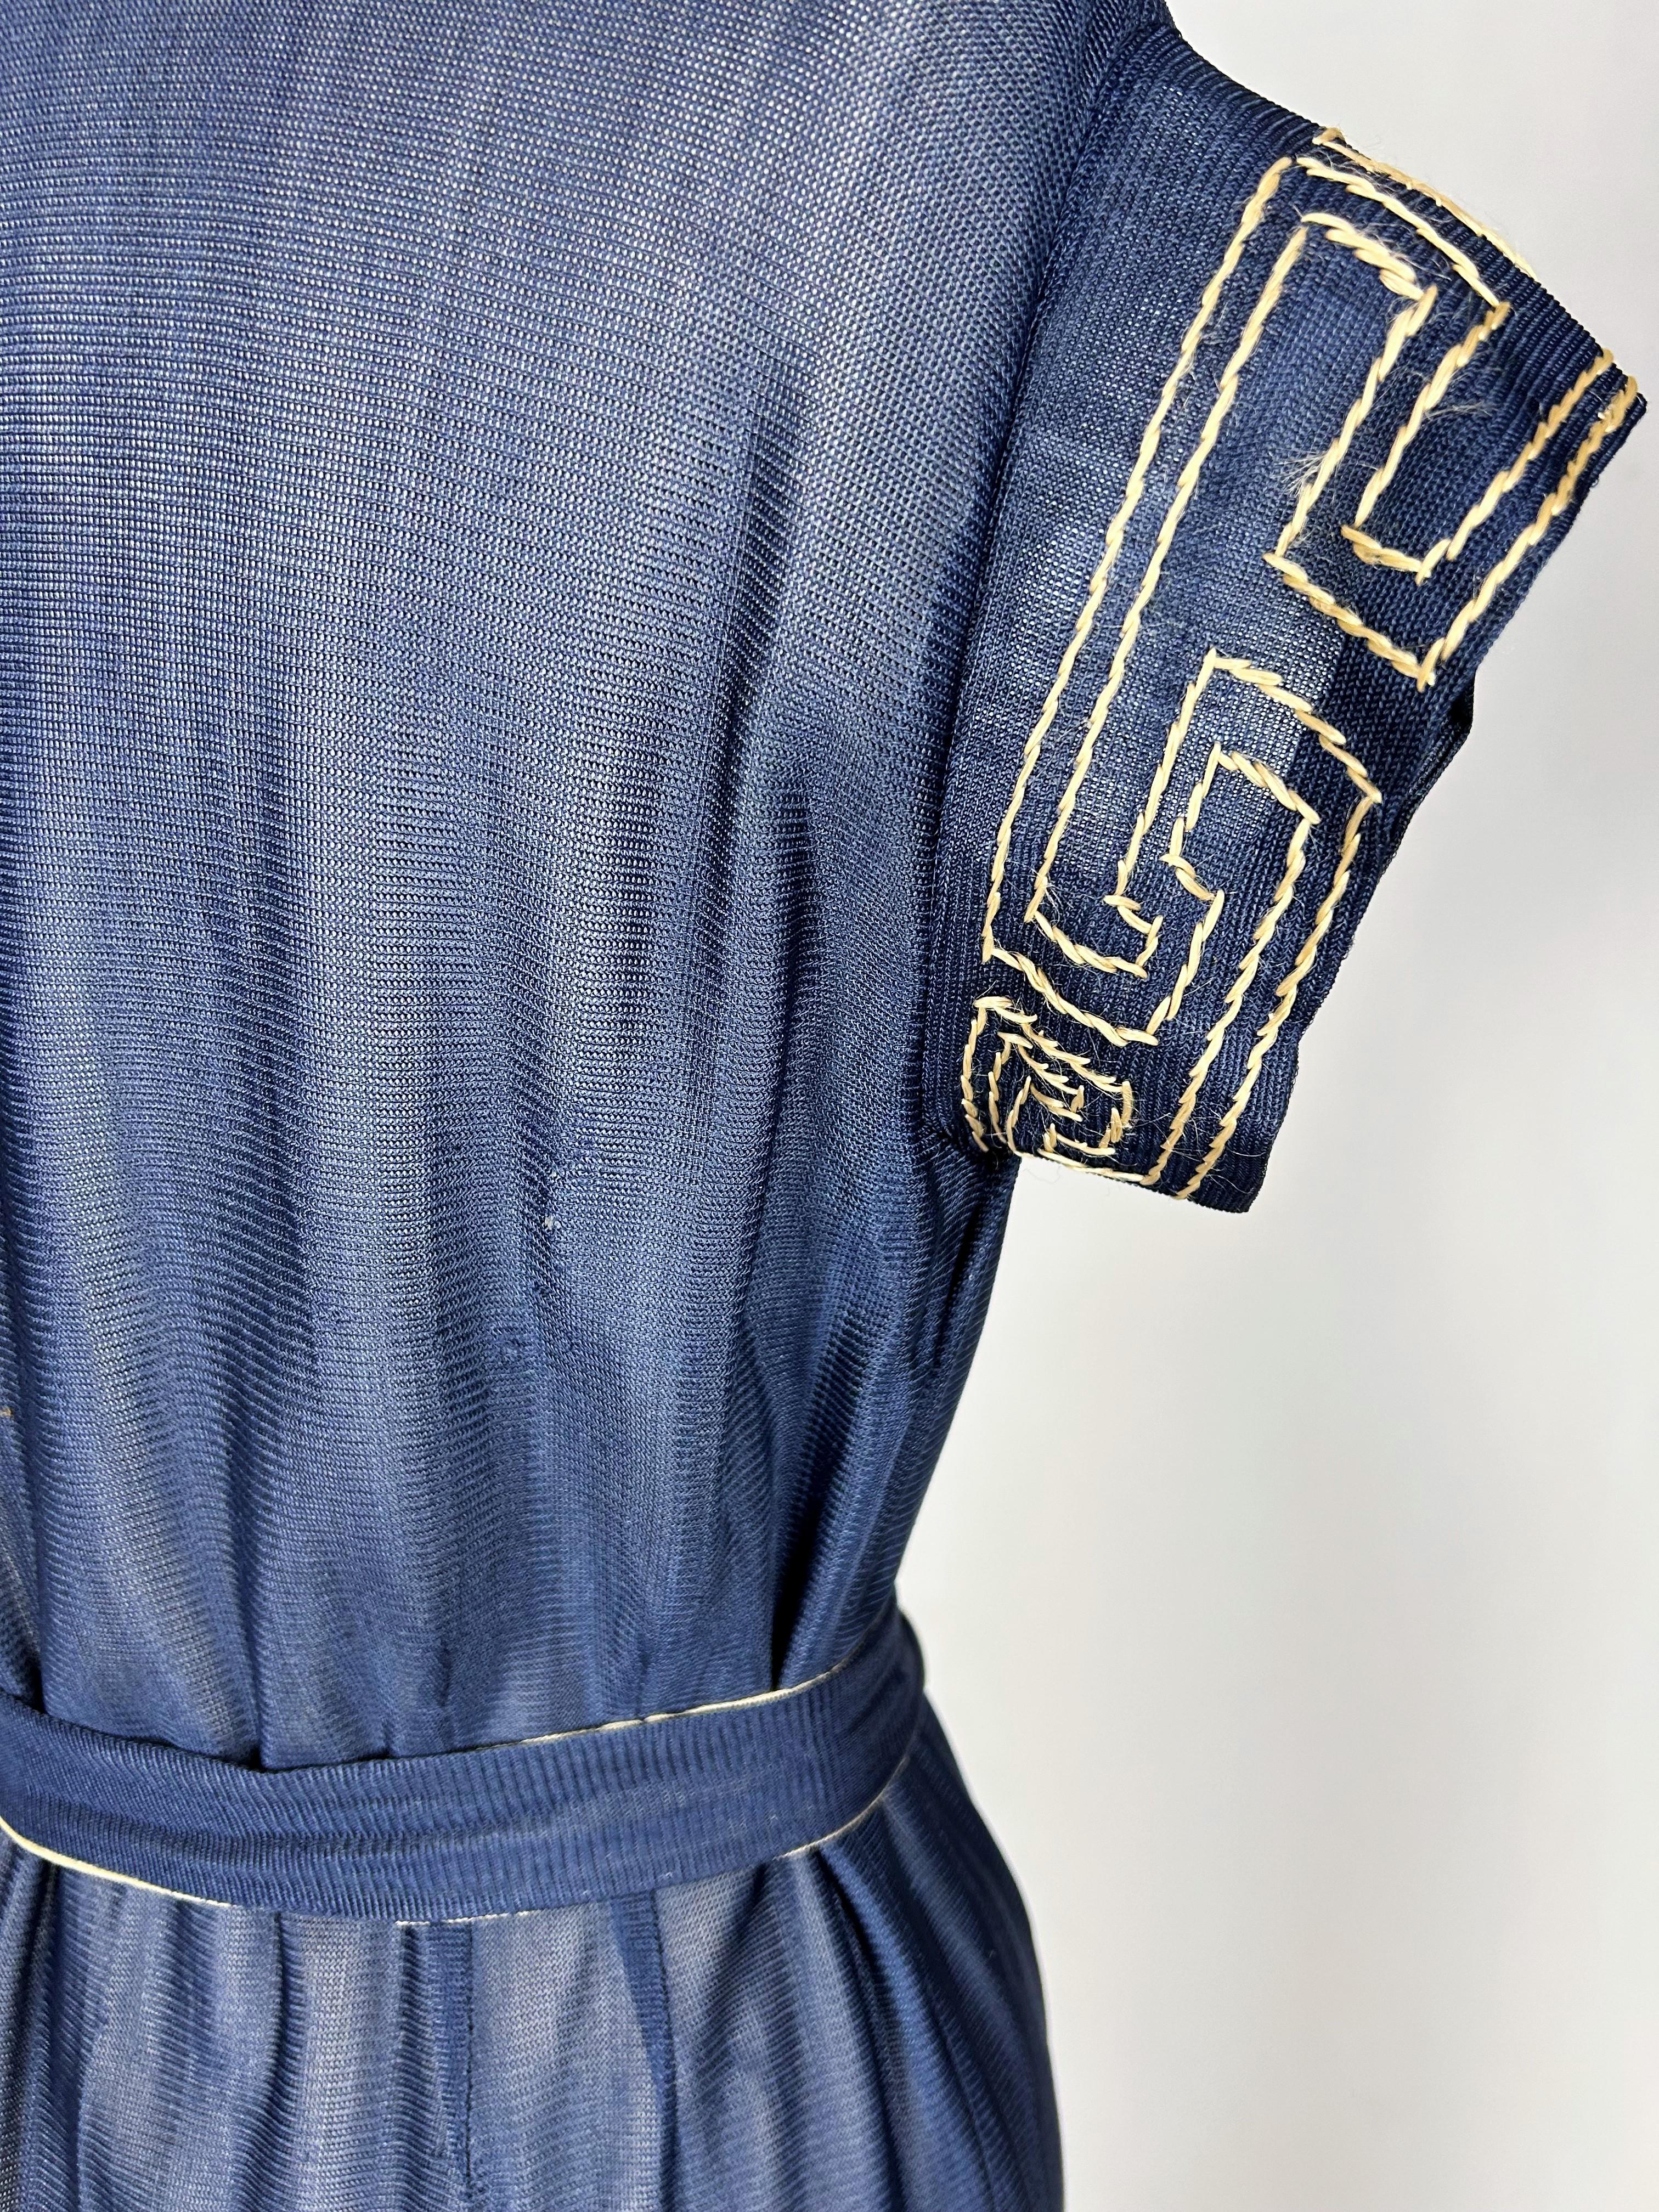 CC embroidered jersey knit silk Dress in the style of Coco Chanel France C. 1920 For Sale 10